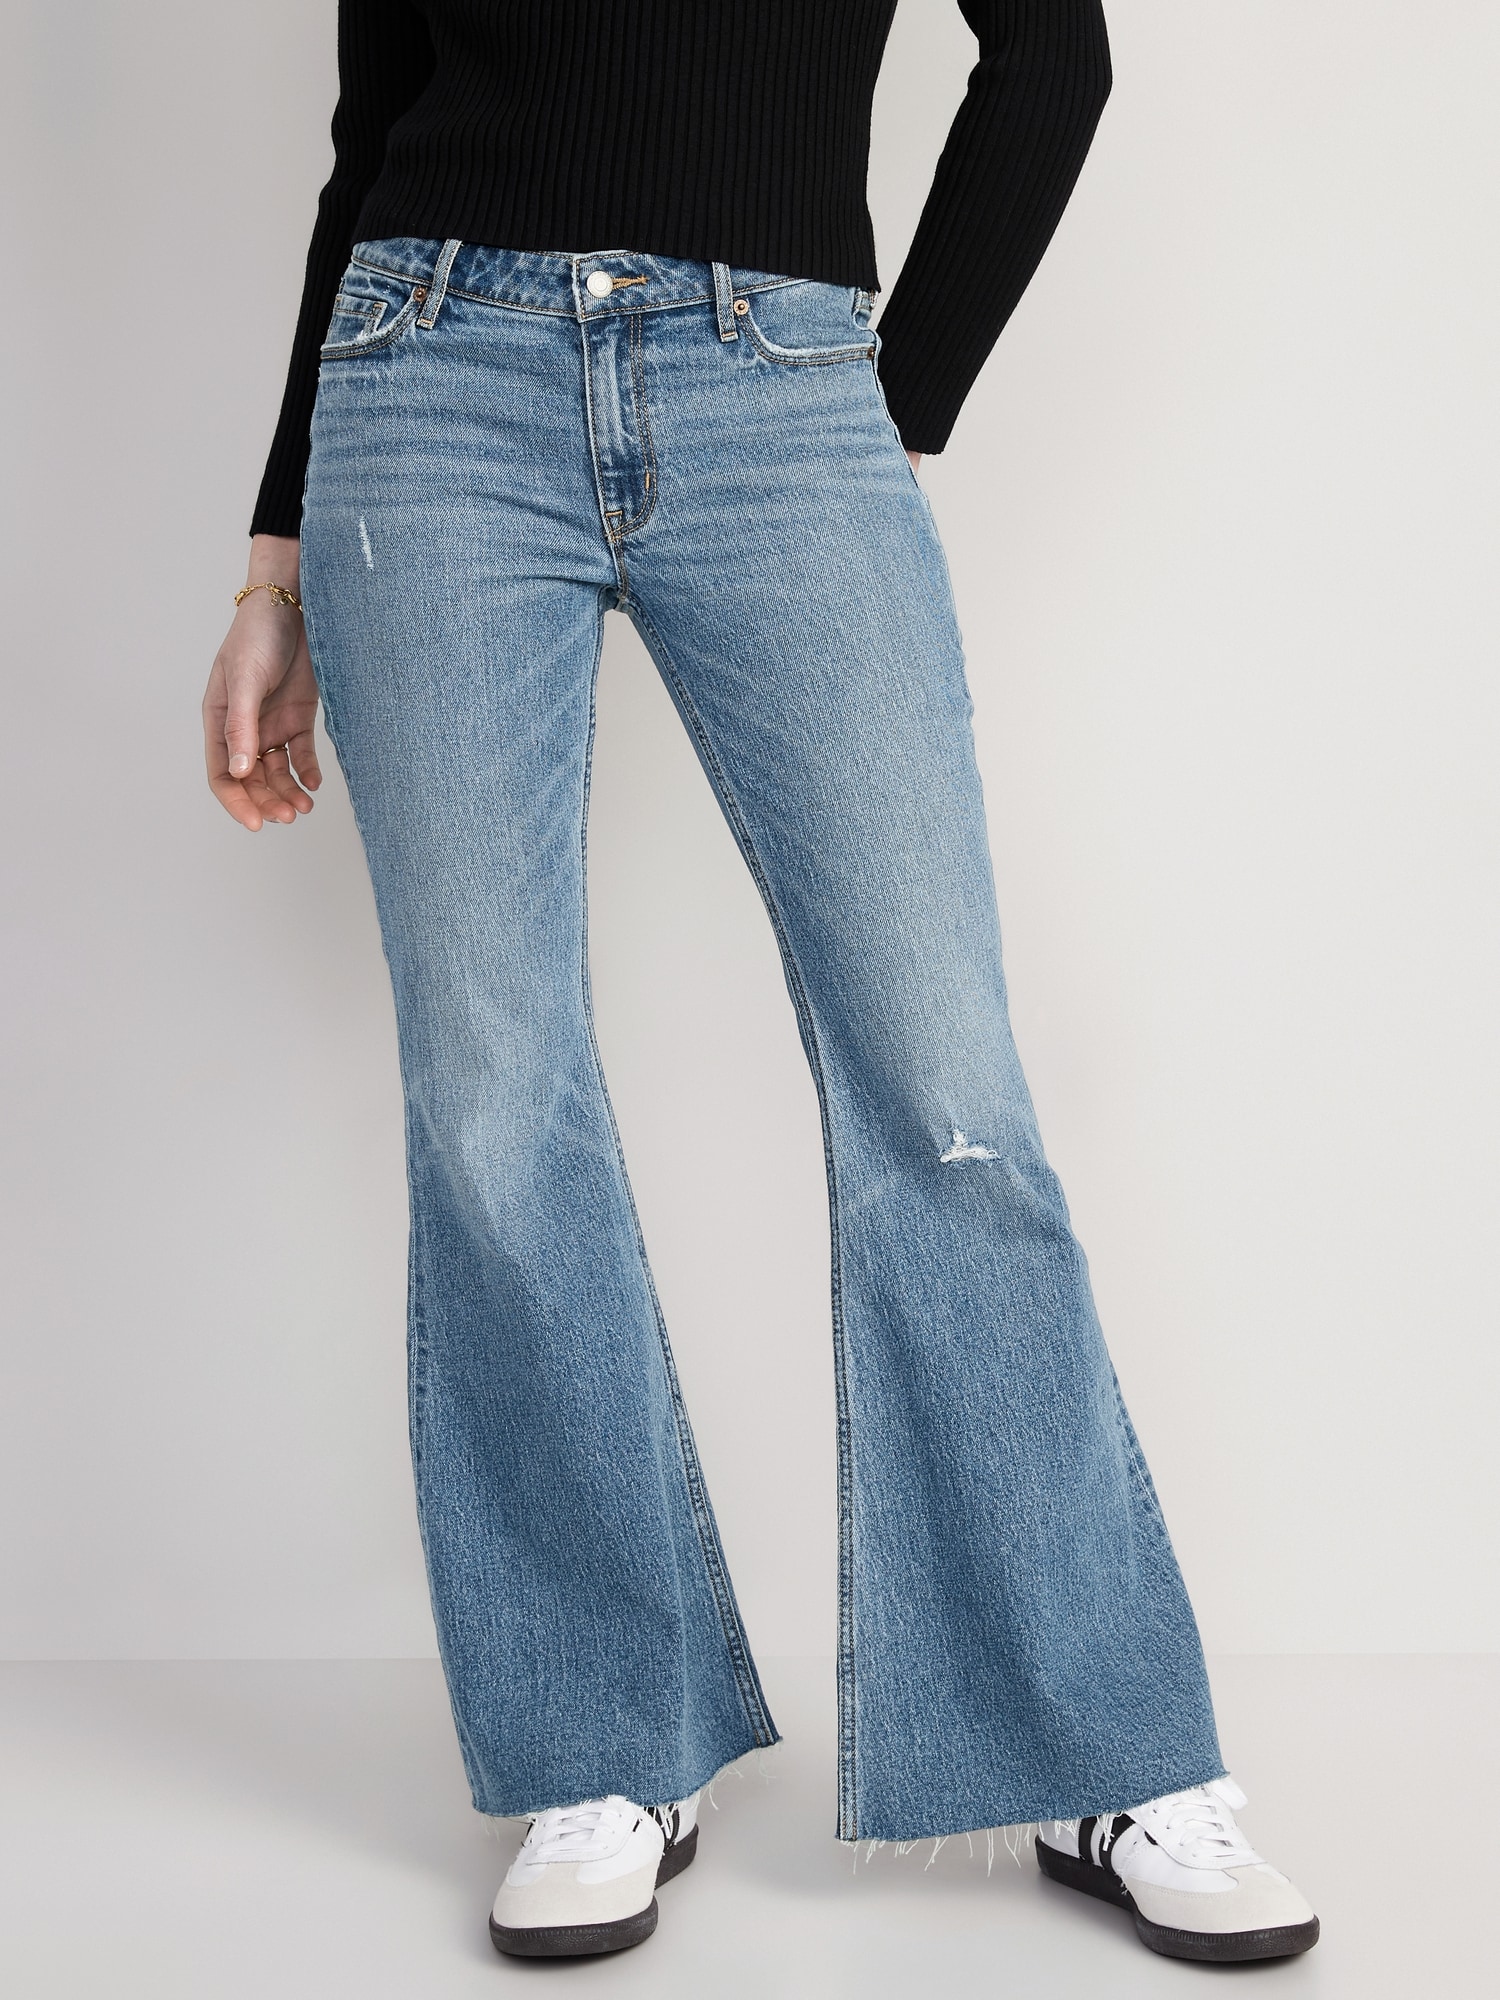 Why It Girls Are Bringing Back Flare Jeans